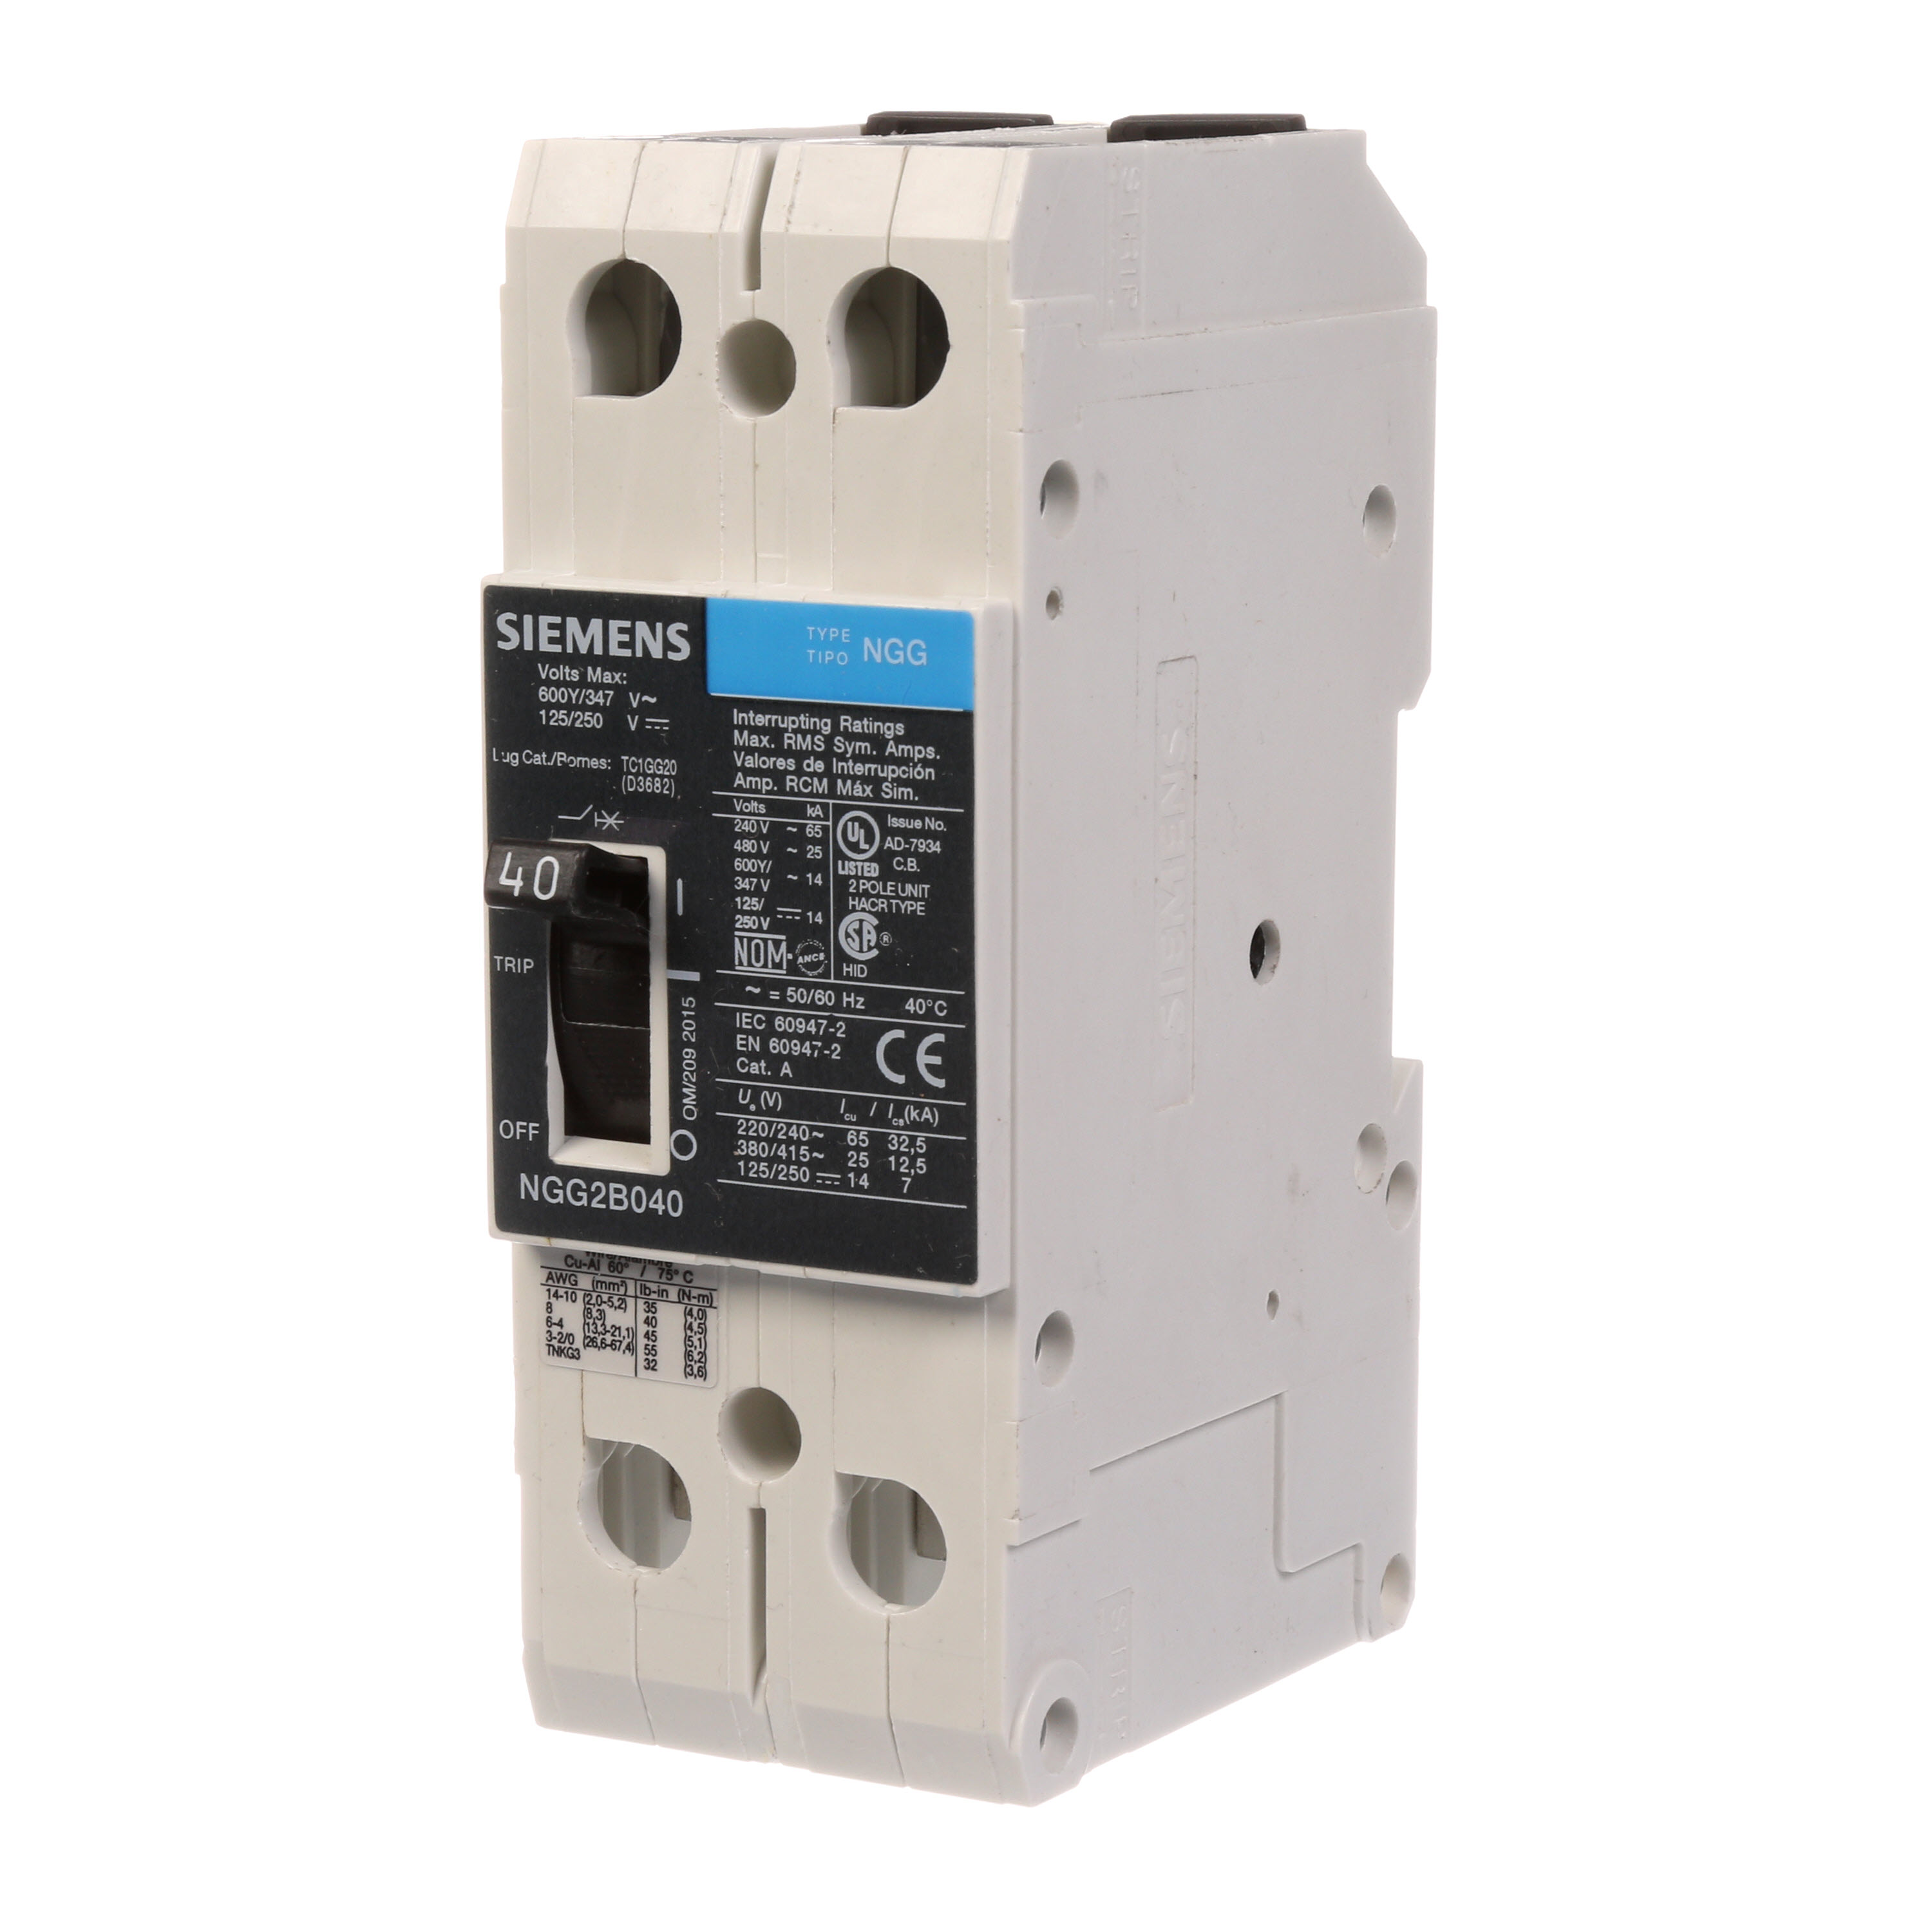 SIEMENS LOW VOLTAGE G FRAME CIRCUIT BREAKER WITH THERMAL - MAGNETIC TRIP. UL LISTED NGG FRAME WITH STANDARD BREAKING CAPACITY. 40A 2-POLE (14KAIC AT 600Y/347V)(25KAIC AT 480V). SPECIAL FEATURES MOUNTS ON DIN RAIL / SCREW, LINE AND LOAD SIDE LUGS (TC1GG20) WIRE RANGE 8 - 1/0 AWS (CU/AL). DIMENSIONS (W x H x D) IN 2 x 5.4 x 2.8.